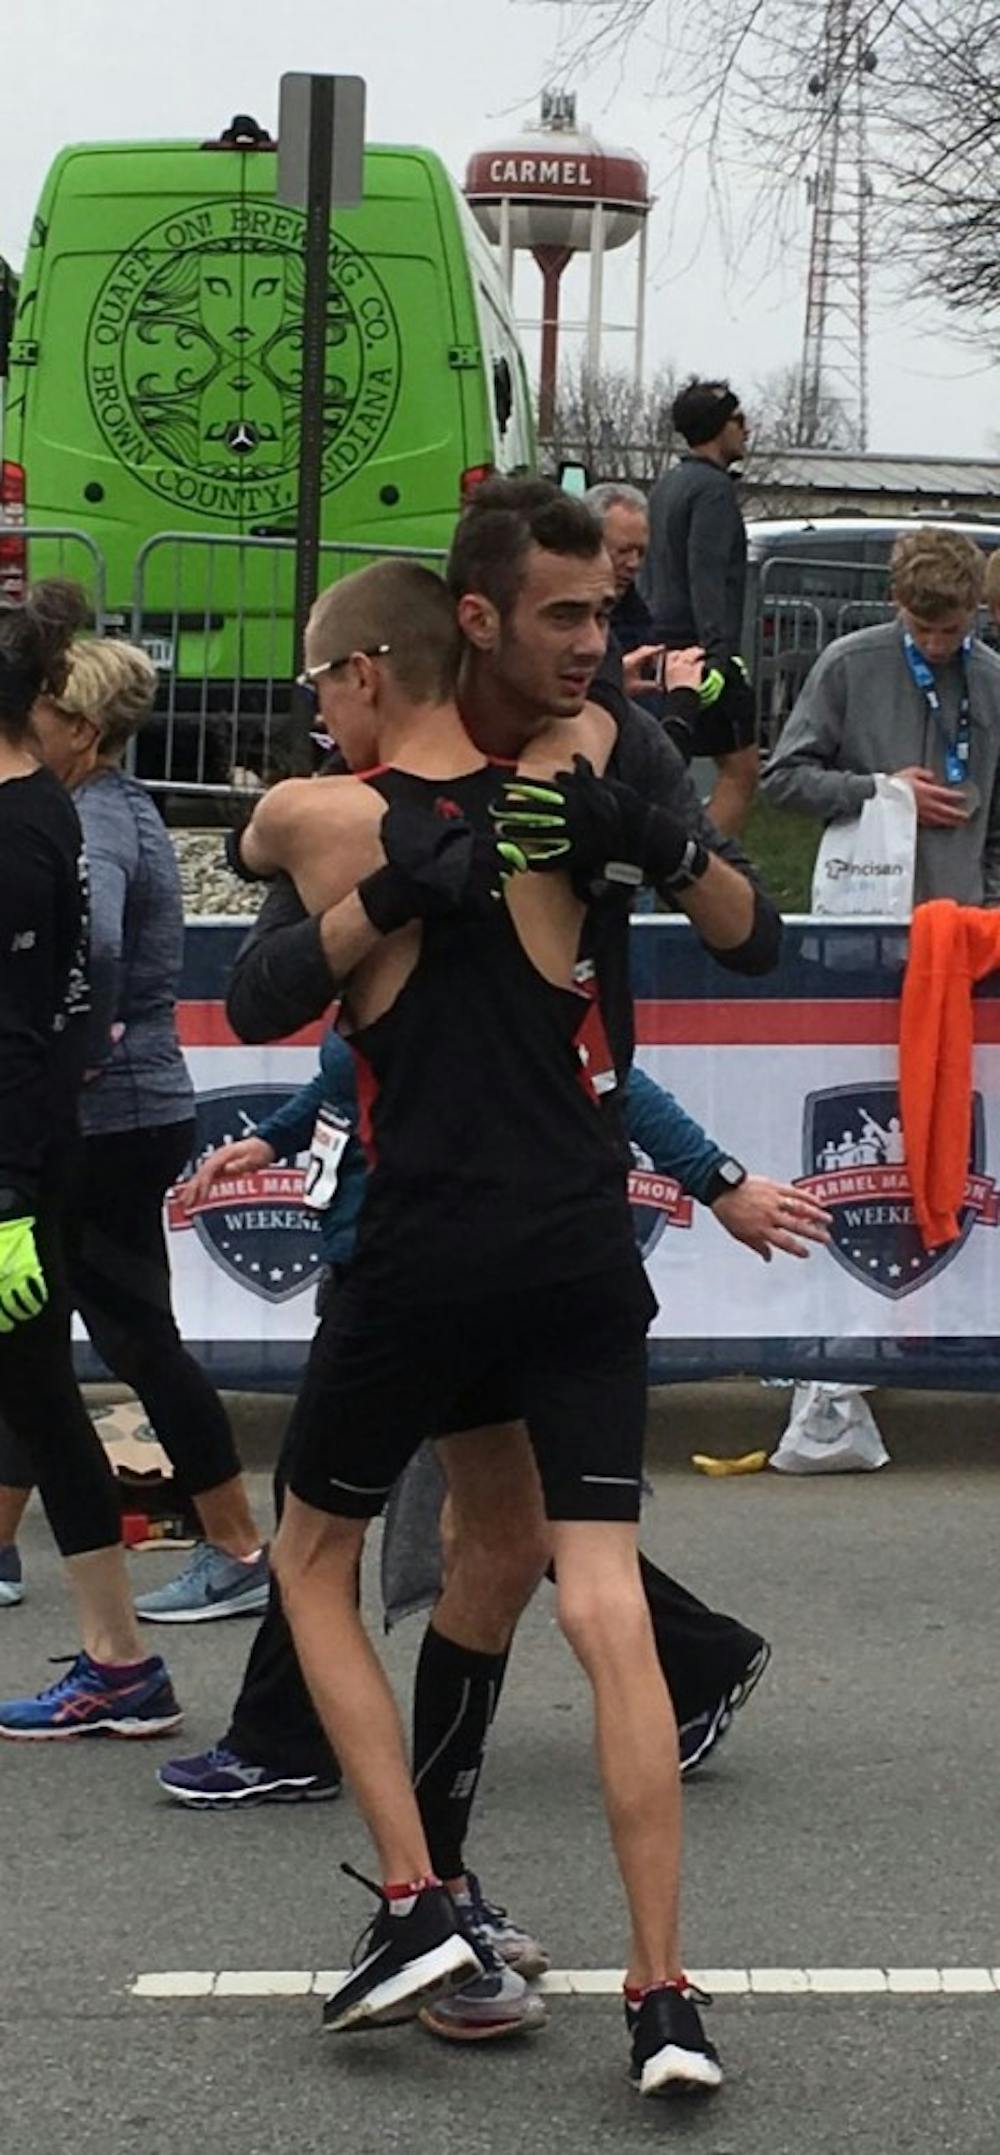 <p>Junior Chris Meyer embraces junior John Brown after the two qualified for the Boston Marathon at the Carmel Marathon on March 31, 2018 in Carmel, Indiana. Junior Katie Fedoronko qualified alongside Meyer and Brown for the Boston Marathon.<strong> Chris Meyer, Photo Provided&nbsp;</strong></p>